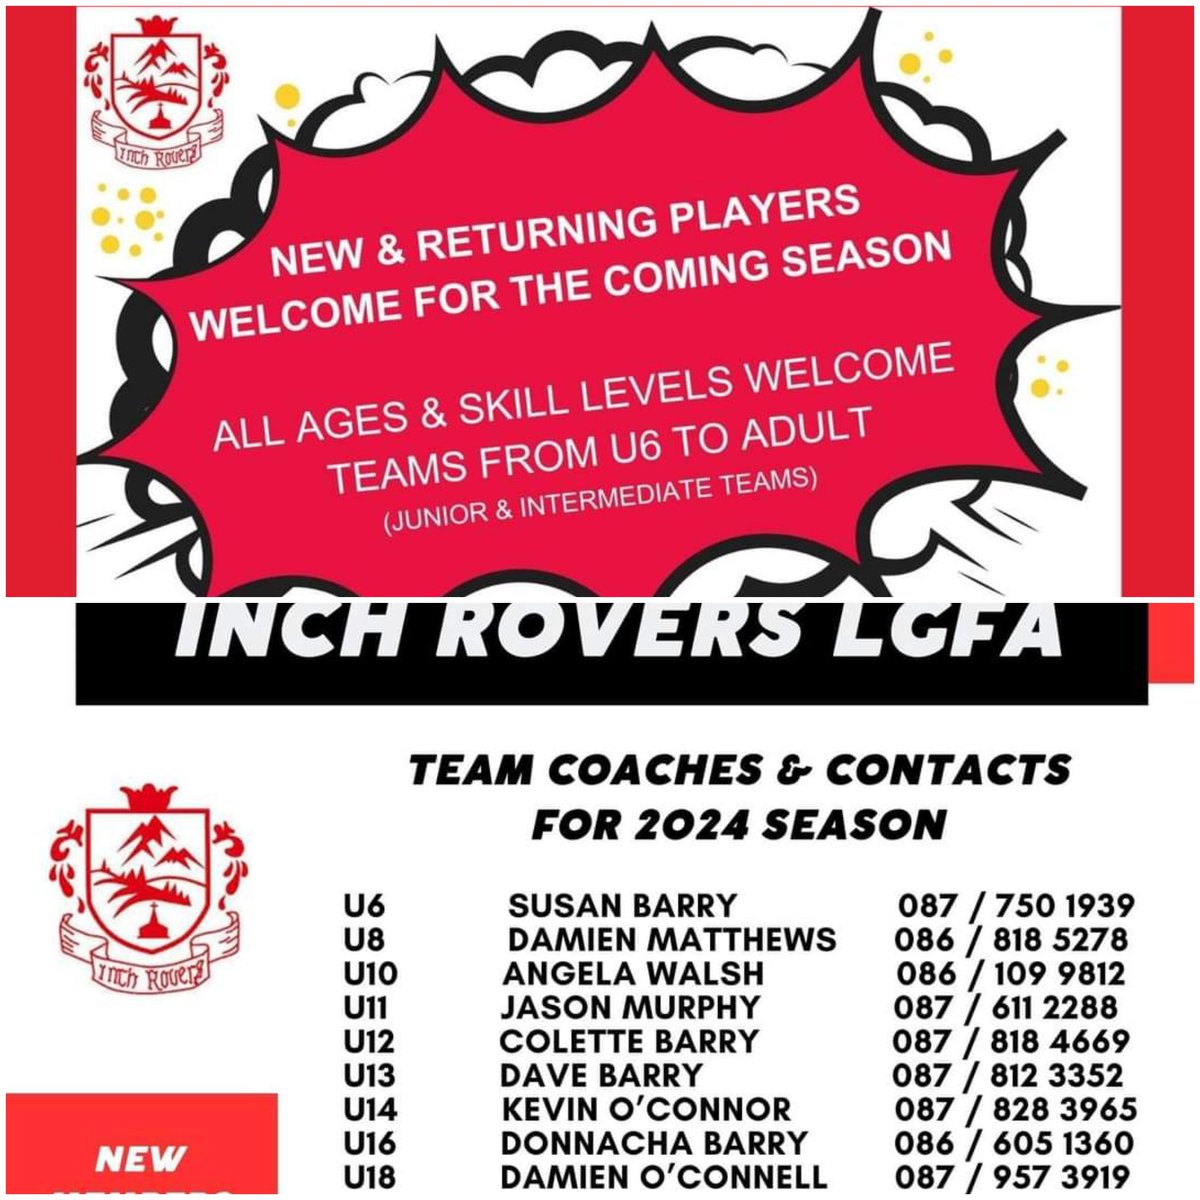 Welcoming all new players to our club, pls come along and give it ago and make new friends. See coaches contacts for all age groups below. 🙌🇵🇪🏐.